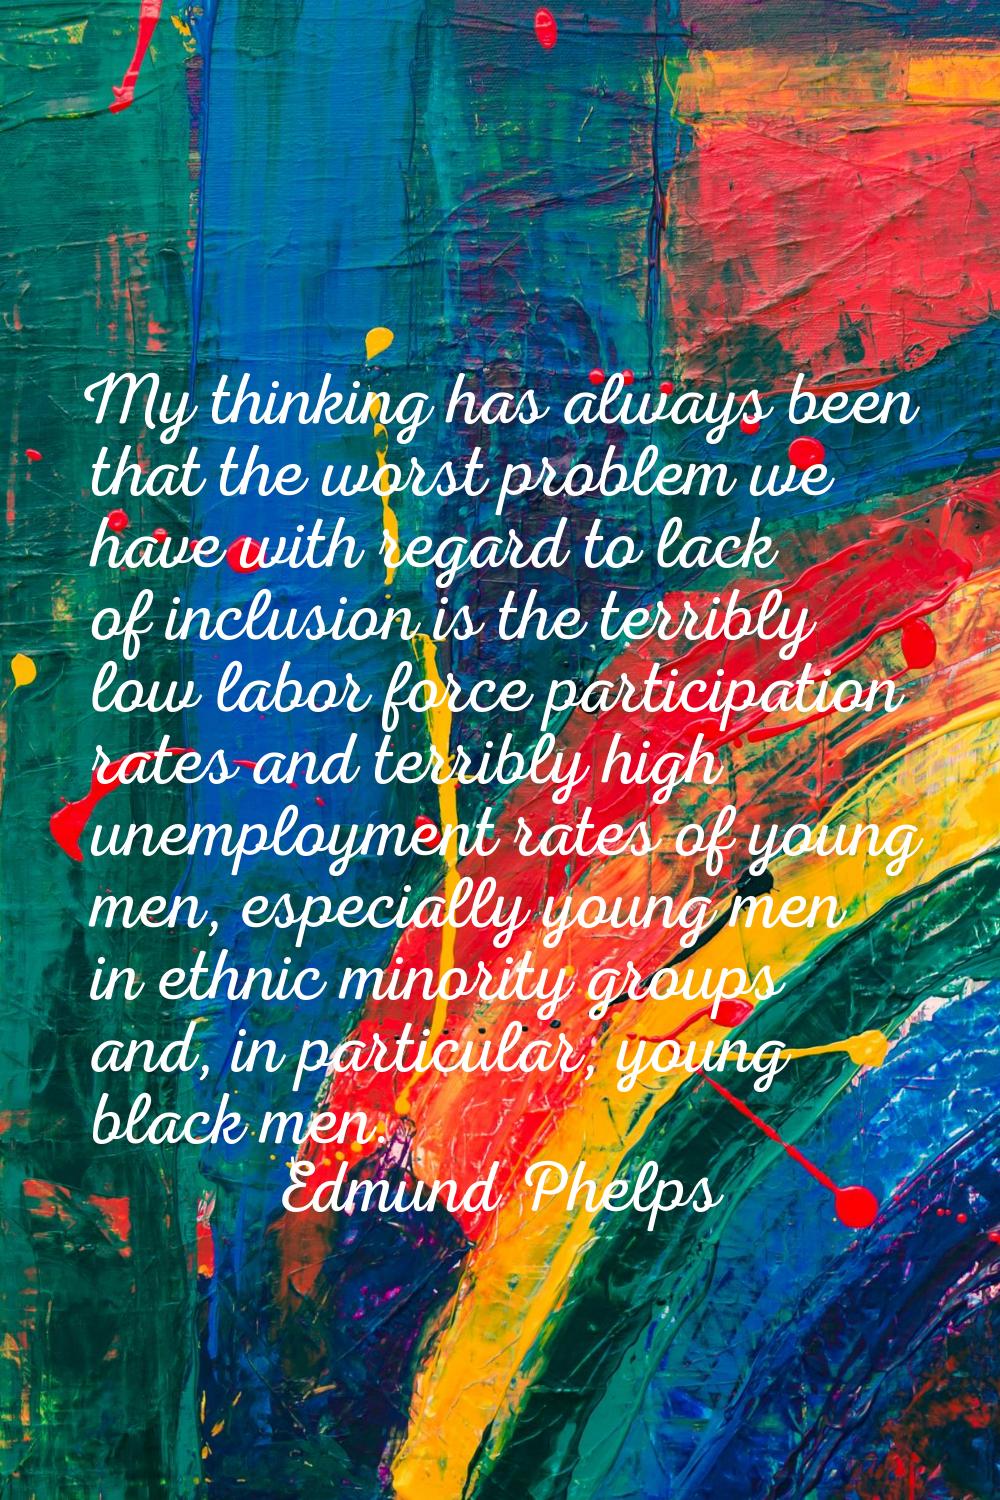 My thinking has always been that the worst problem we have with regard to lack of inclusion is the 